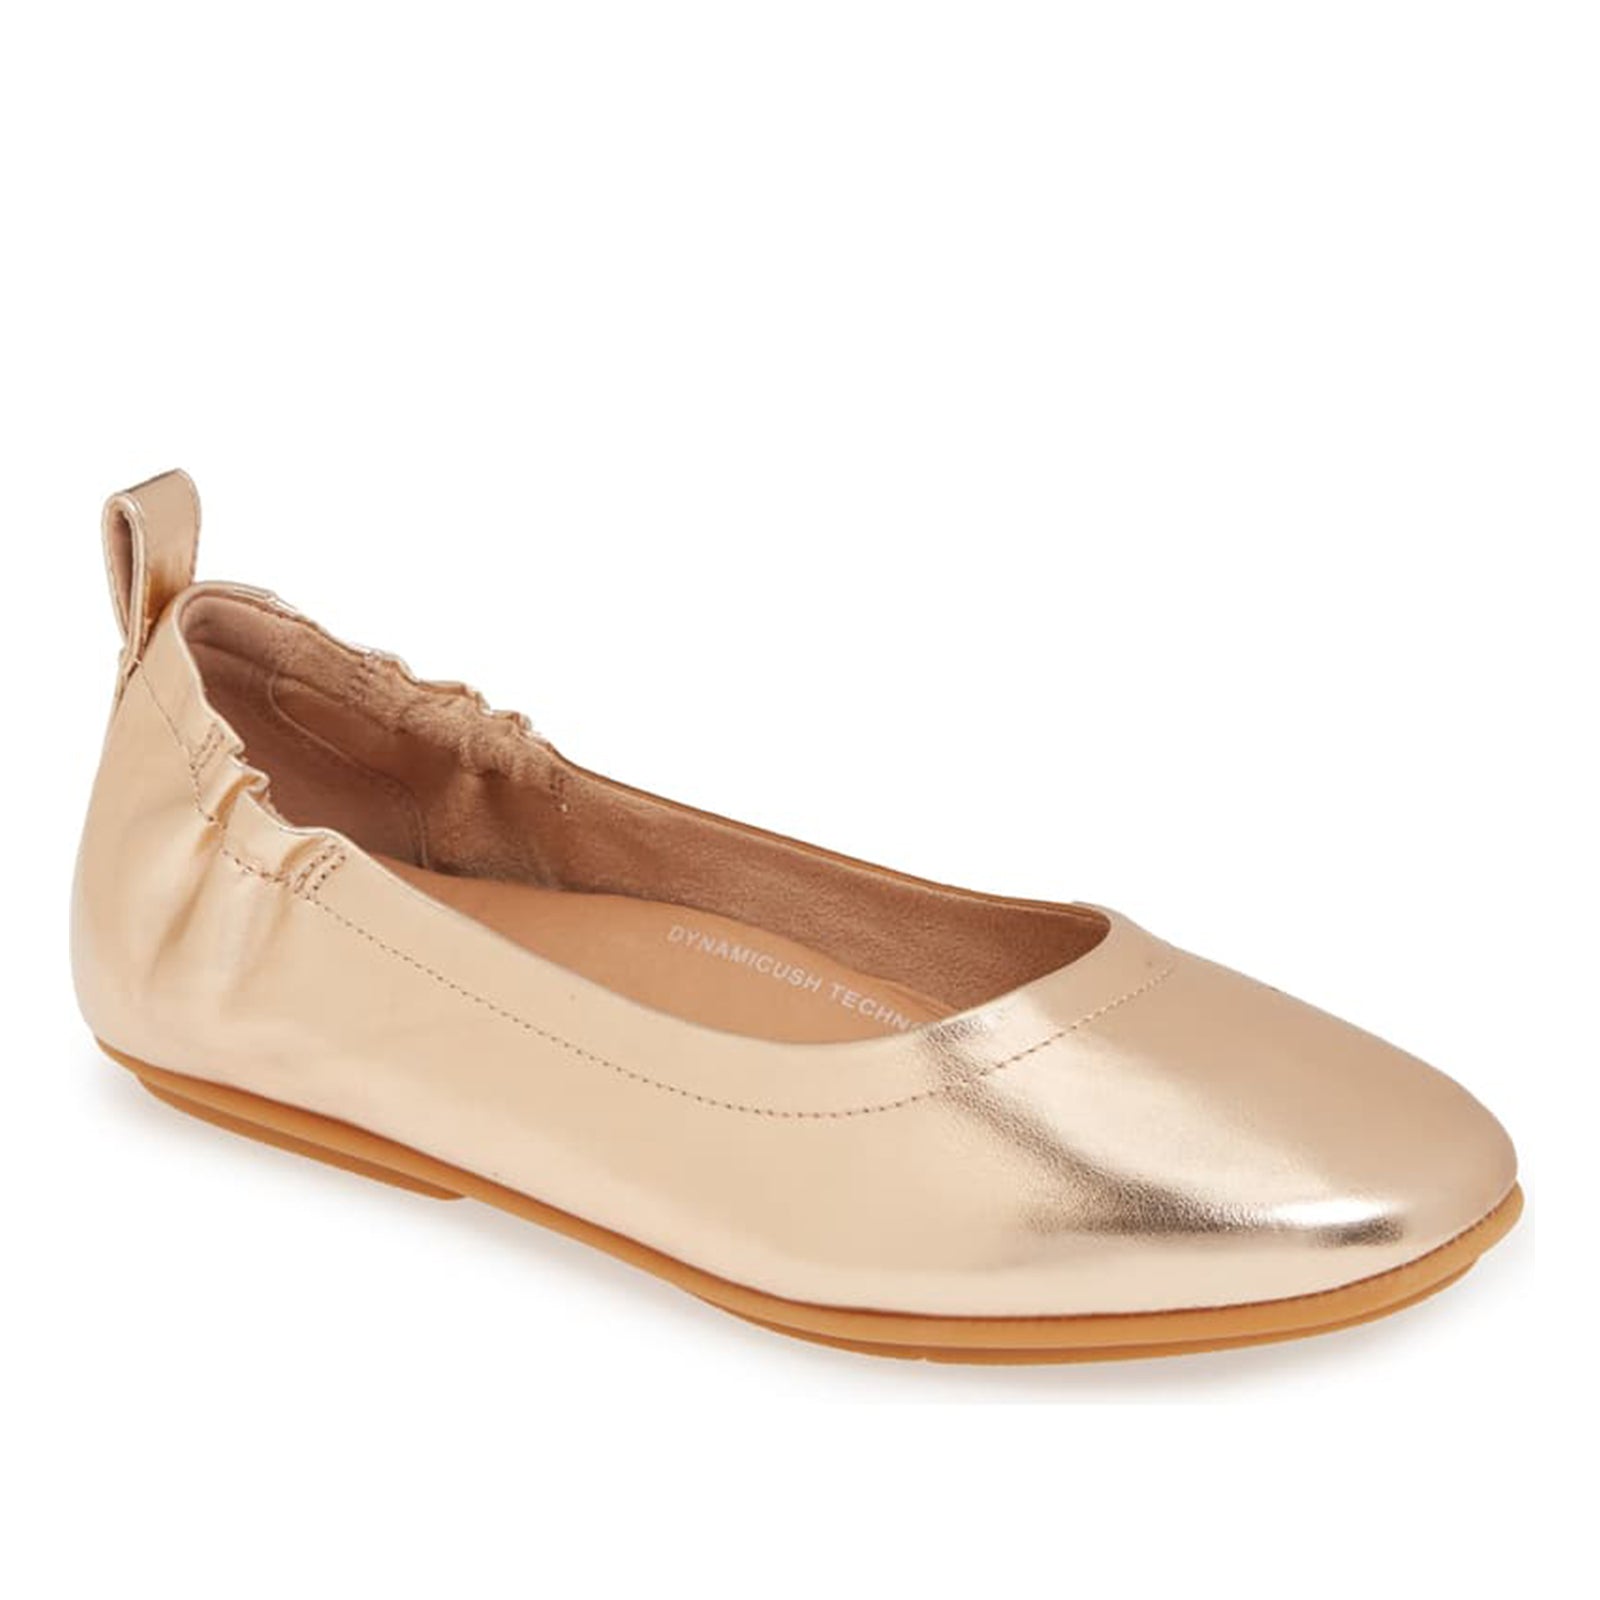 FitFlop Allegro  W61-323 (Rose Gold)